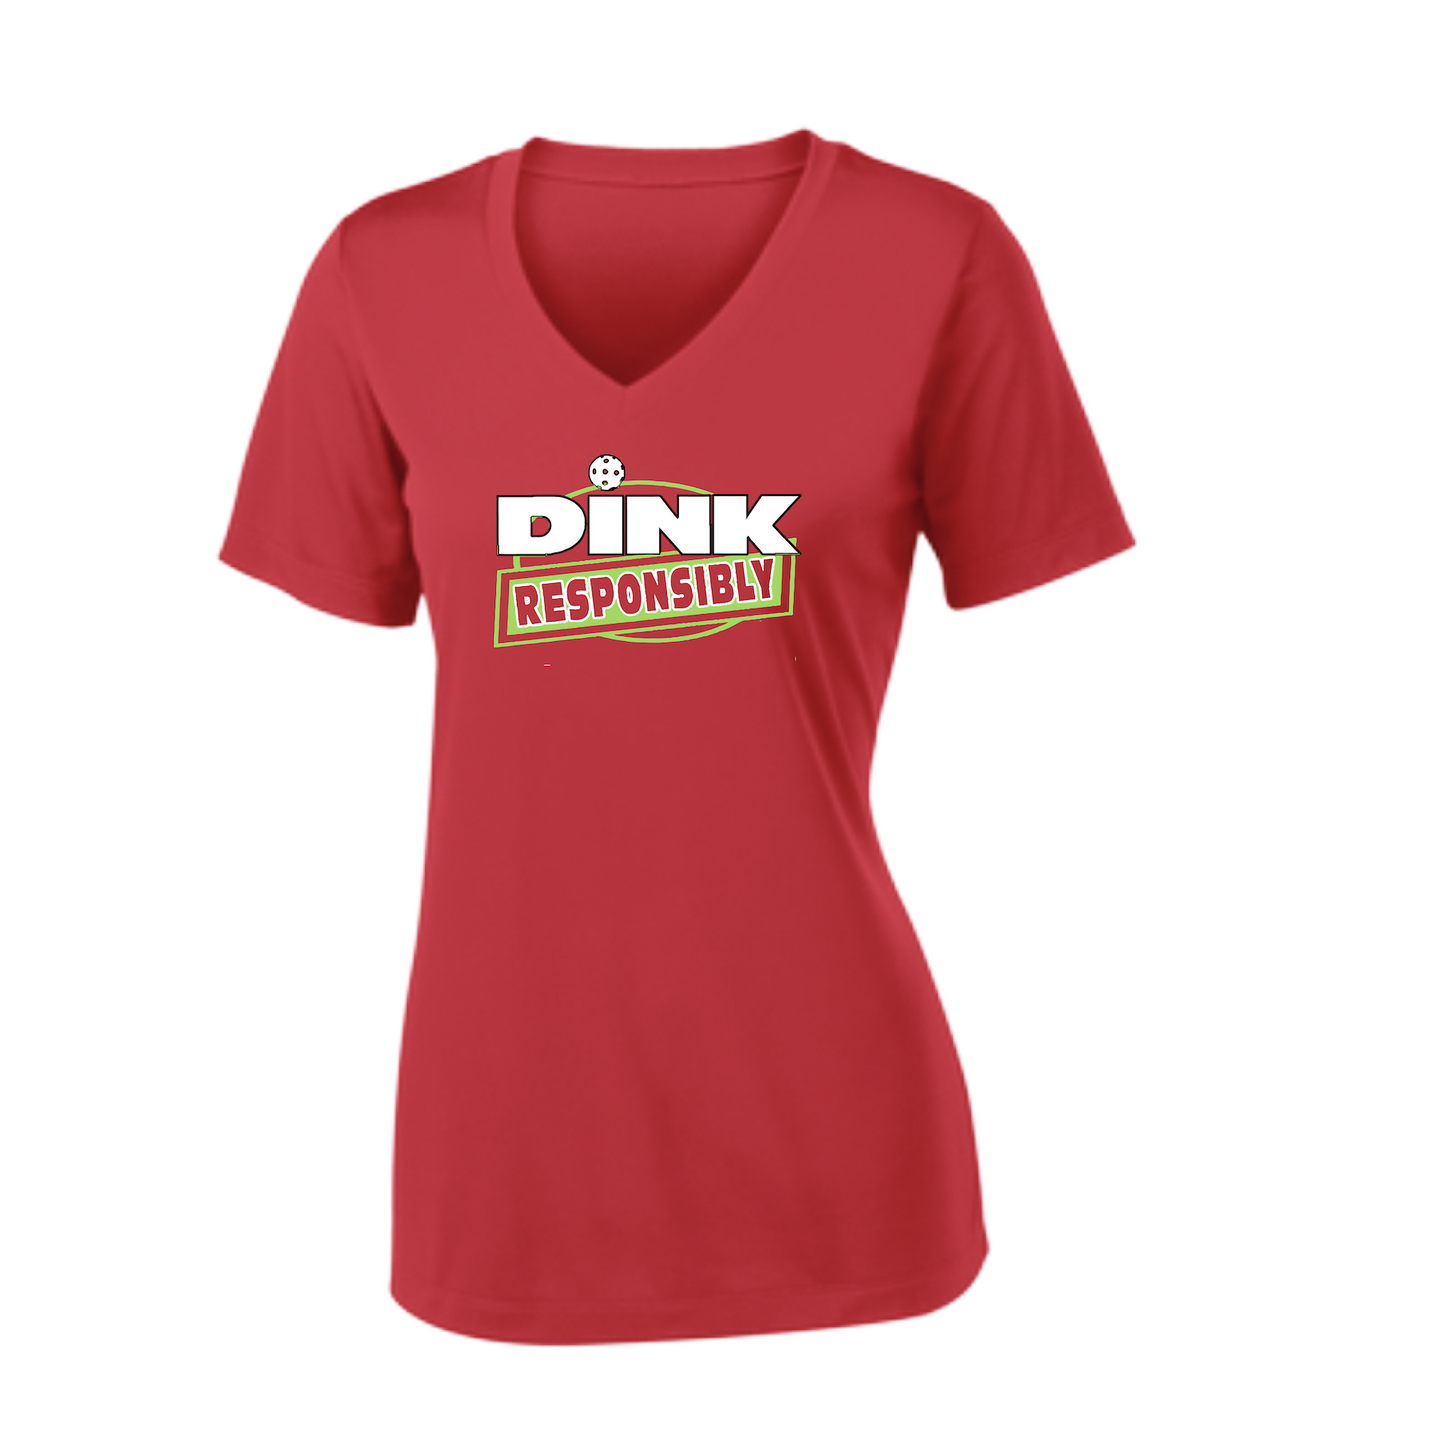 Pickleball Design: Dink Responsibly  Women's Style:  Short Sleeve V-Neck  Turn up the volume in this Women's shirt with its perfect mix of softness and attitude. Material is ultra-comfortable with moisture wicking properties and tri-blend softness. PosiCharge technology locks in color. Highly breathable and lightweight.